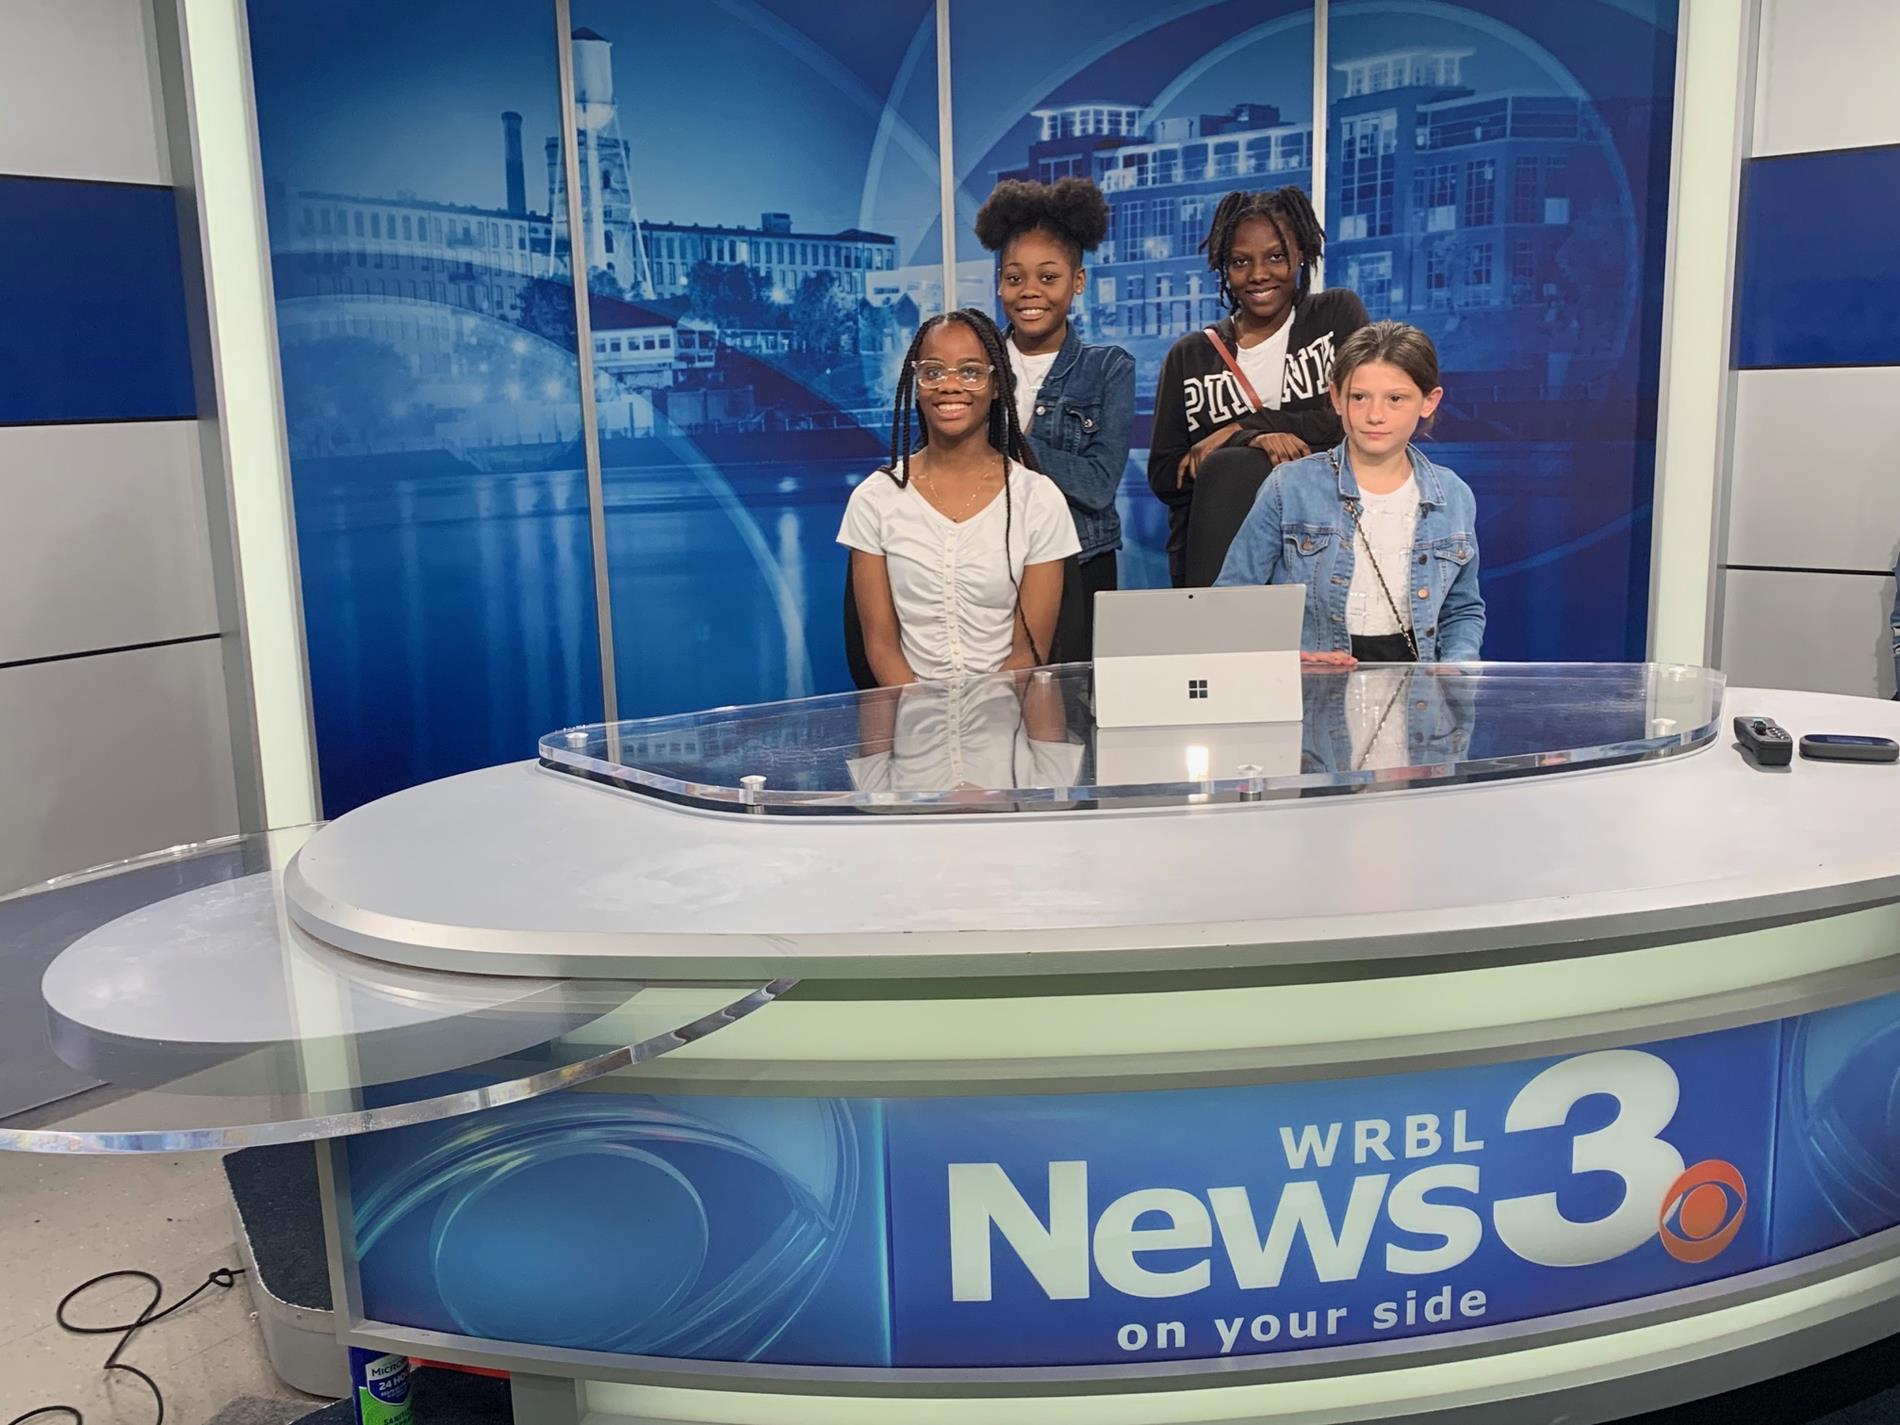 The Stewart County Schools’ Journalism Club visited WRBL 